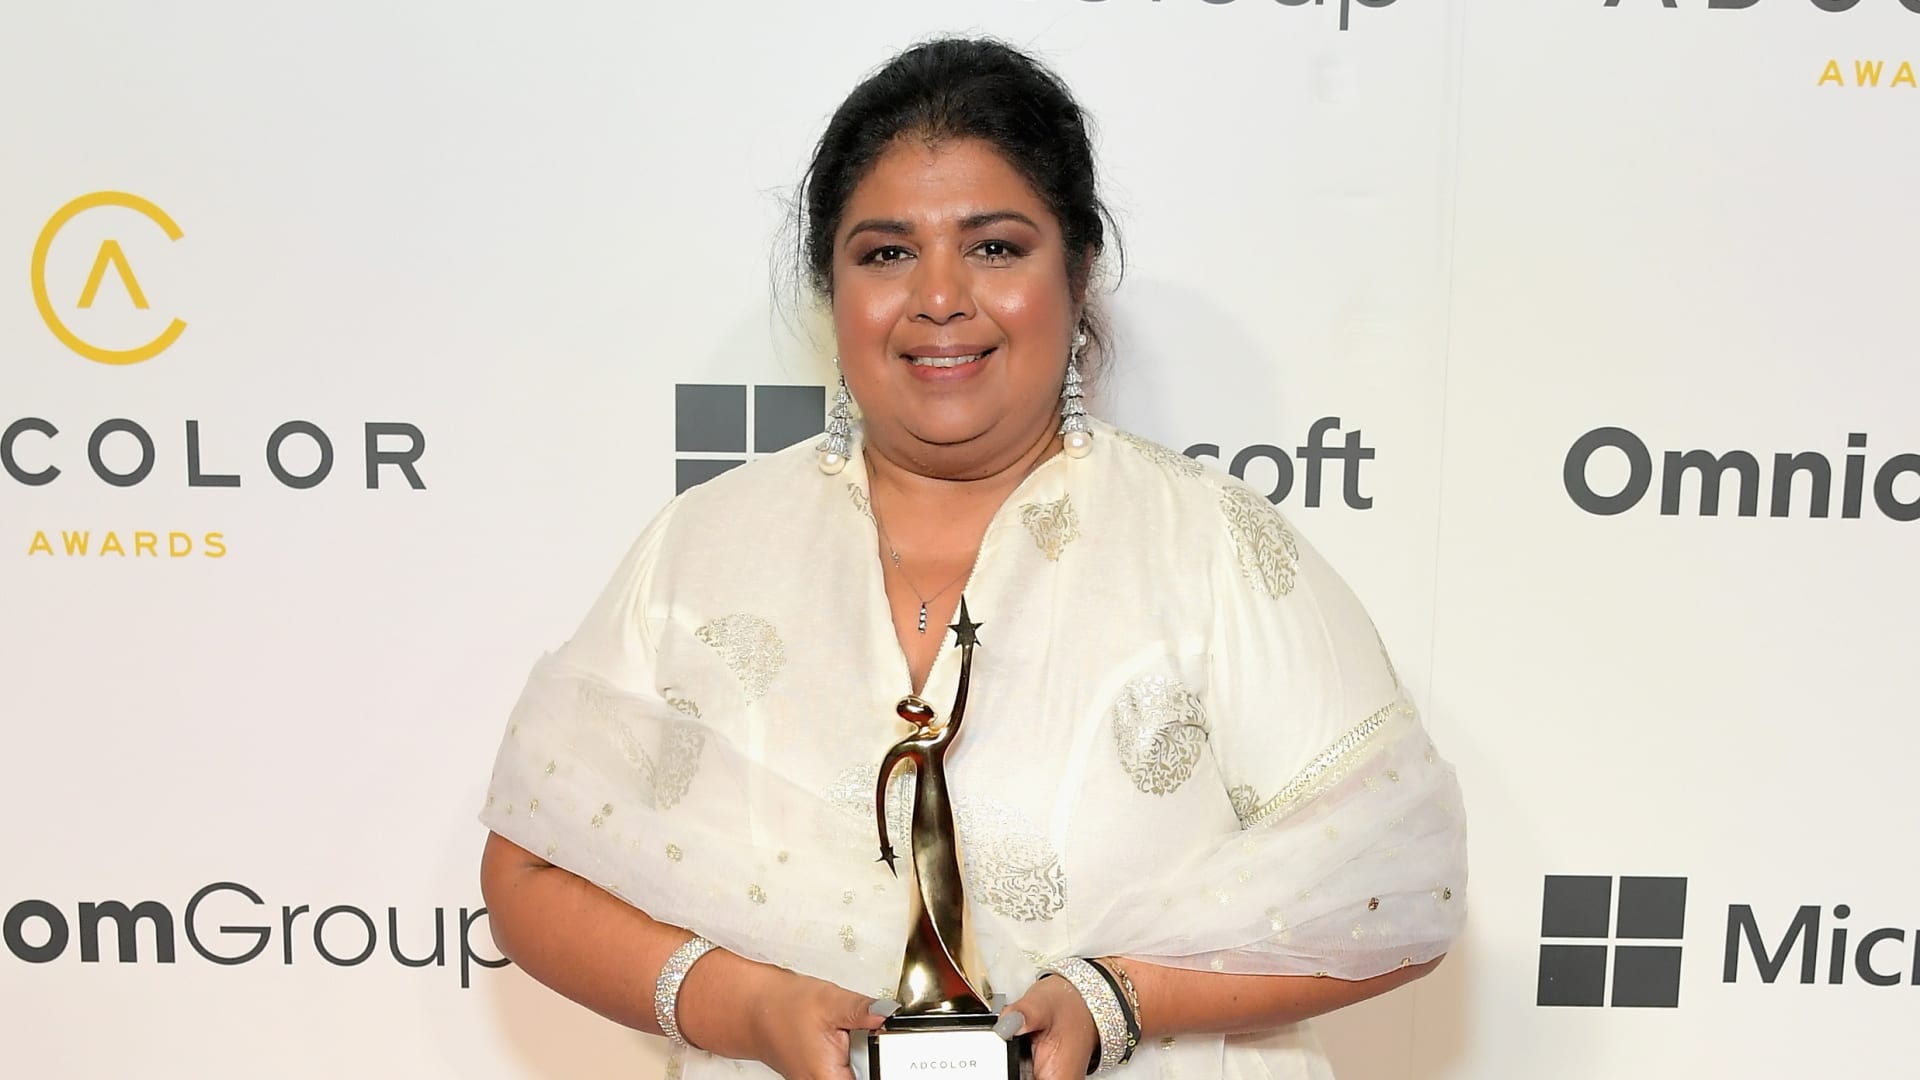 Absolut CEO Ann Mukherjee shares the one piece of career advice everyone needs to hear